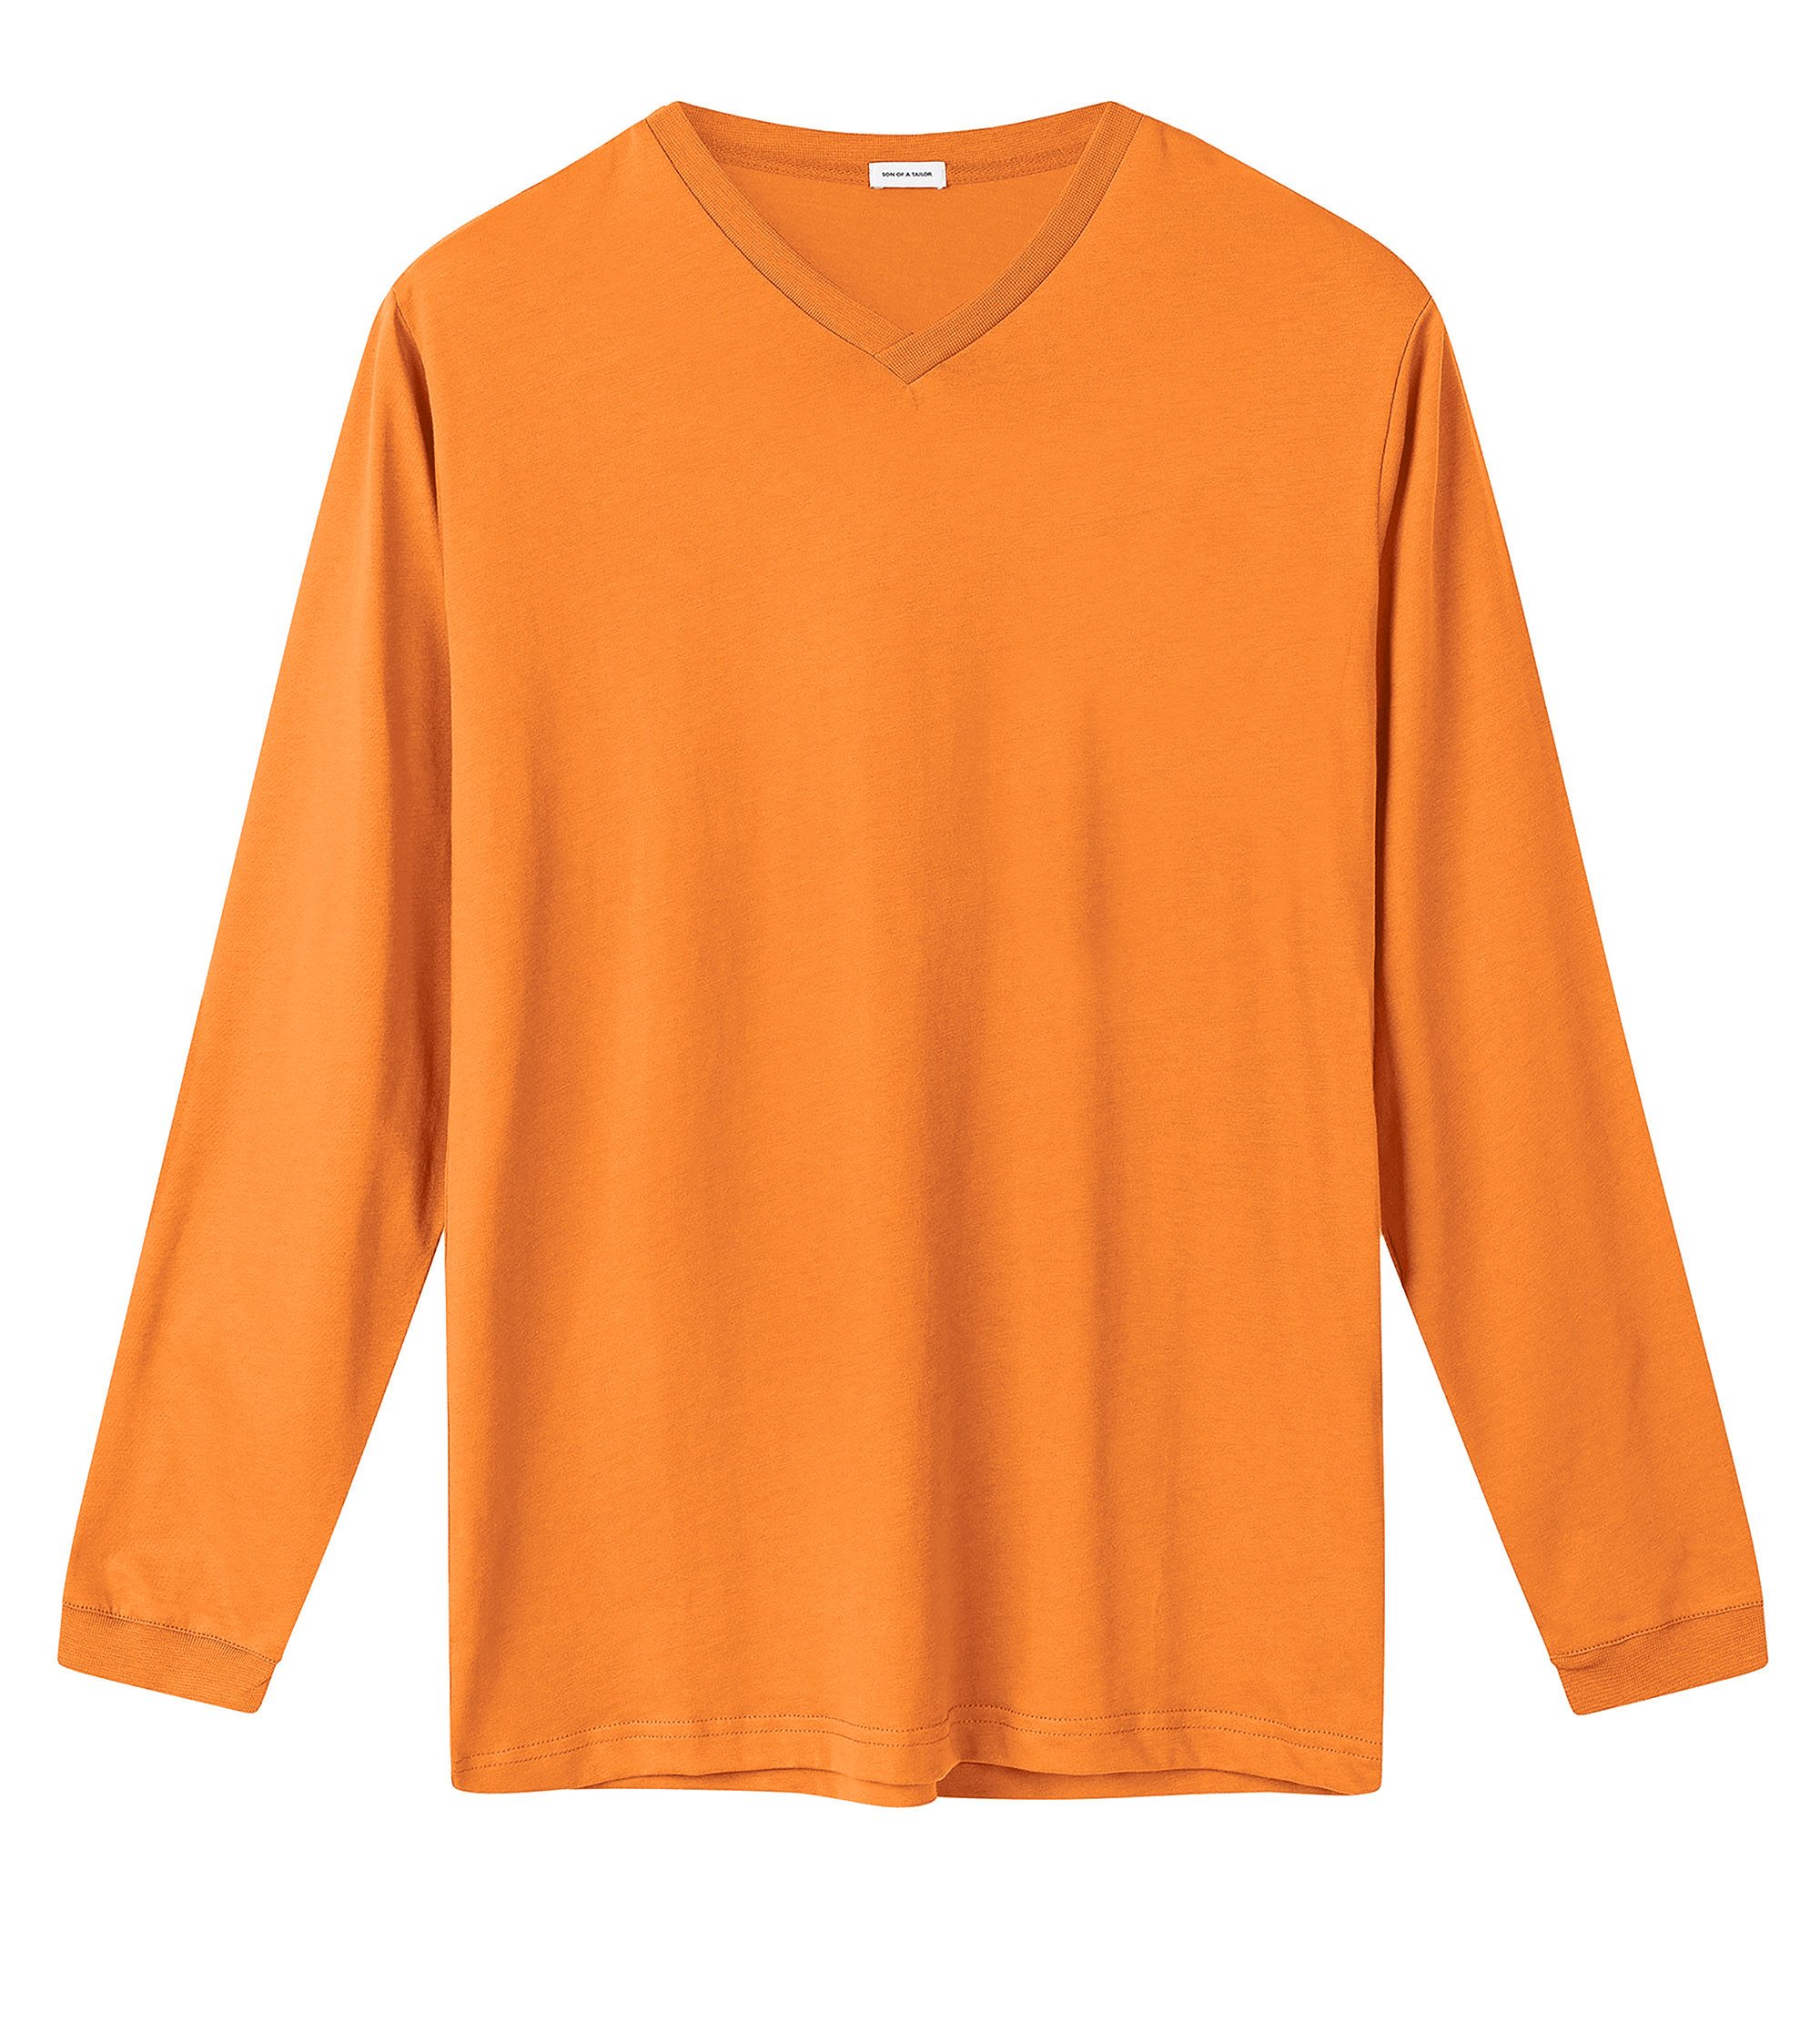 Custom Fitted Cotton T-Shirt / Long-Sleeve Russet Orange